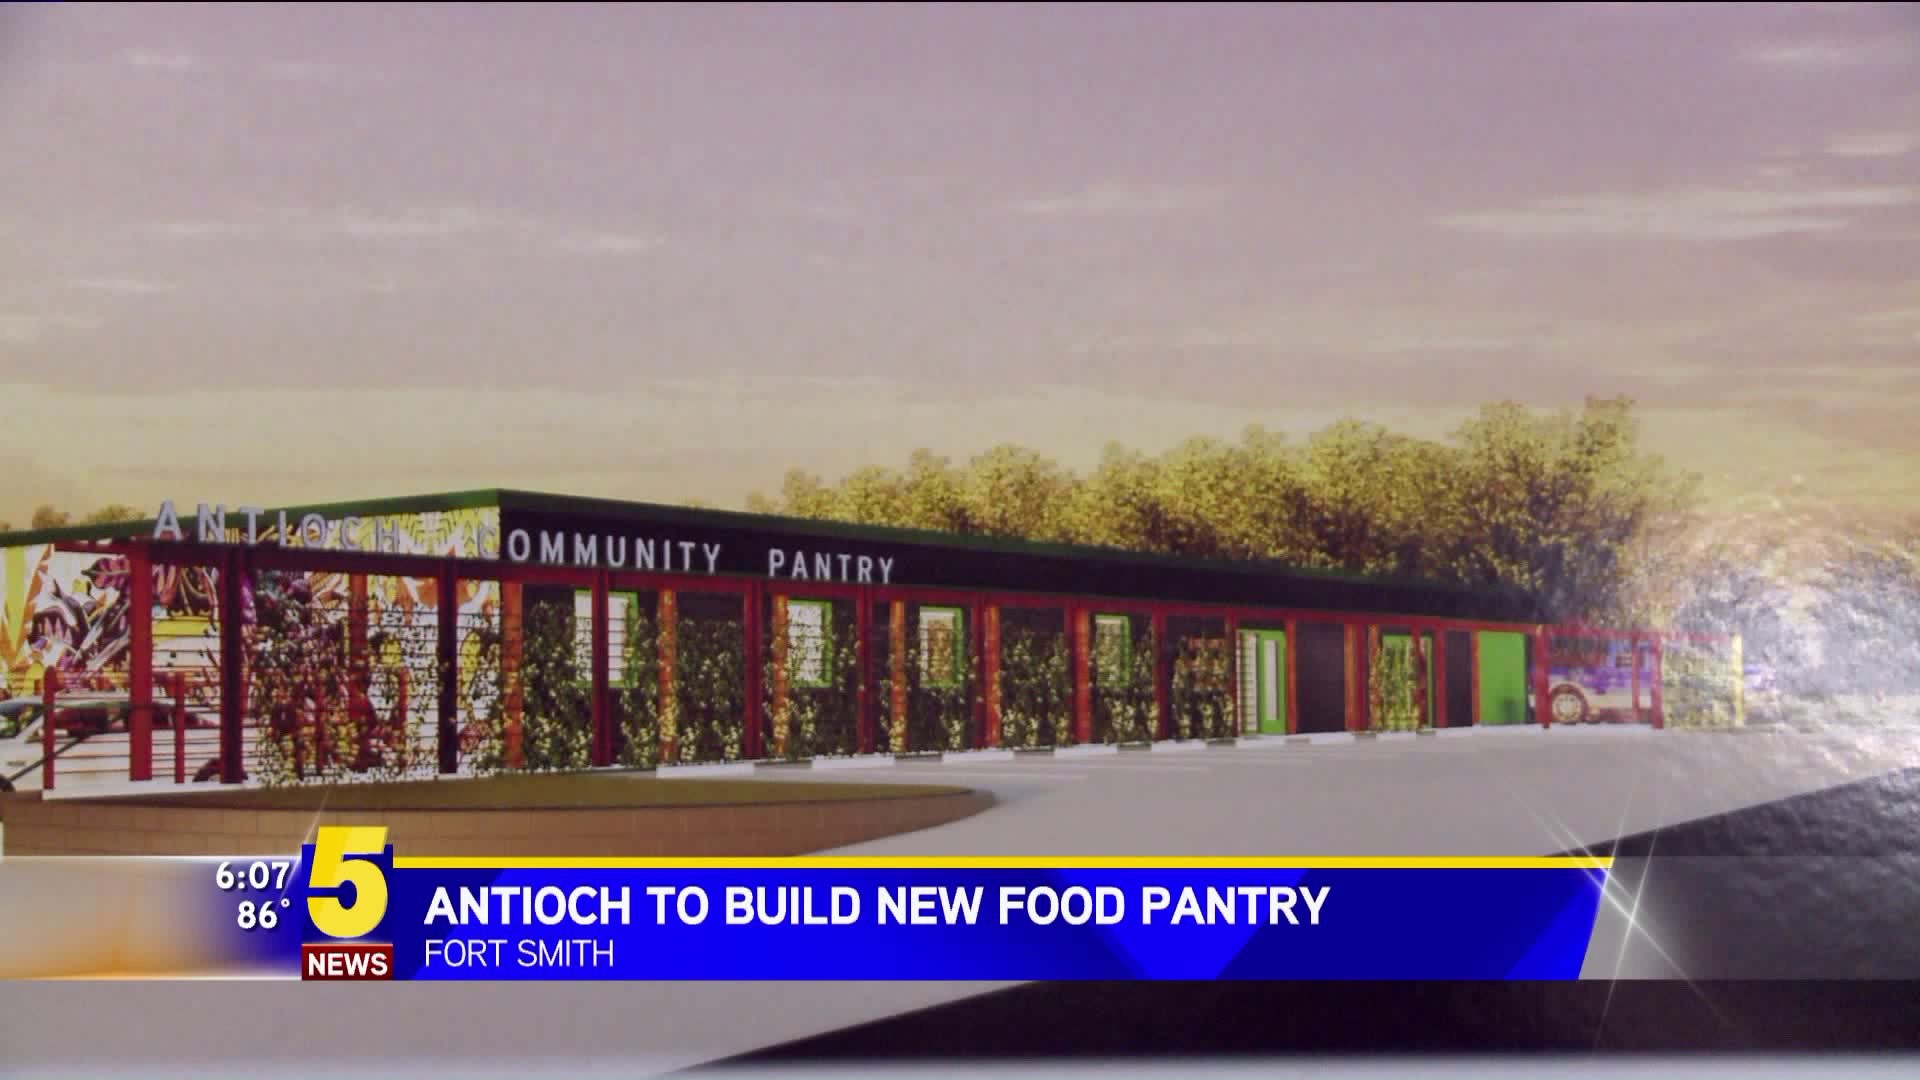 Antioch To Build New Food Pantry